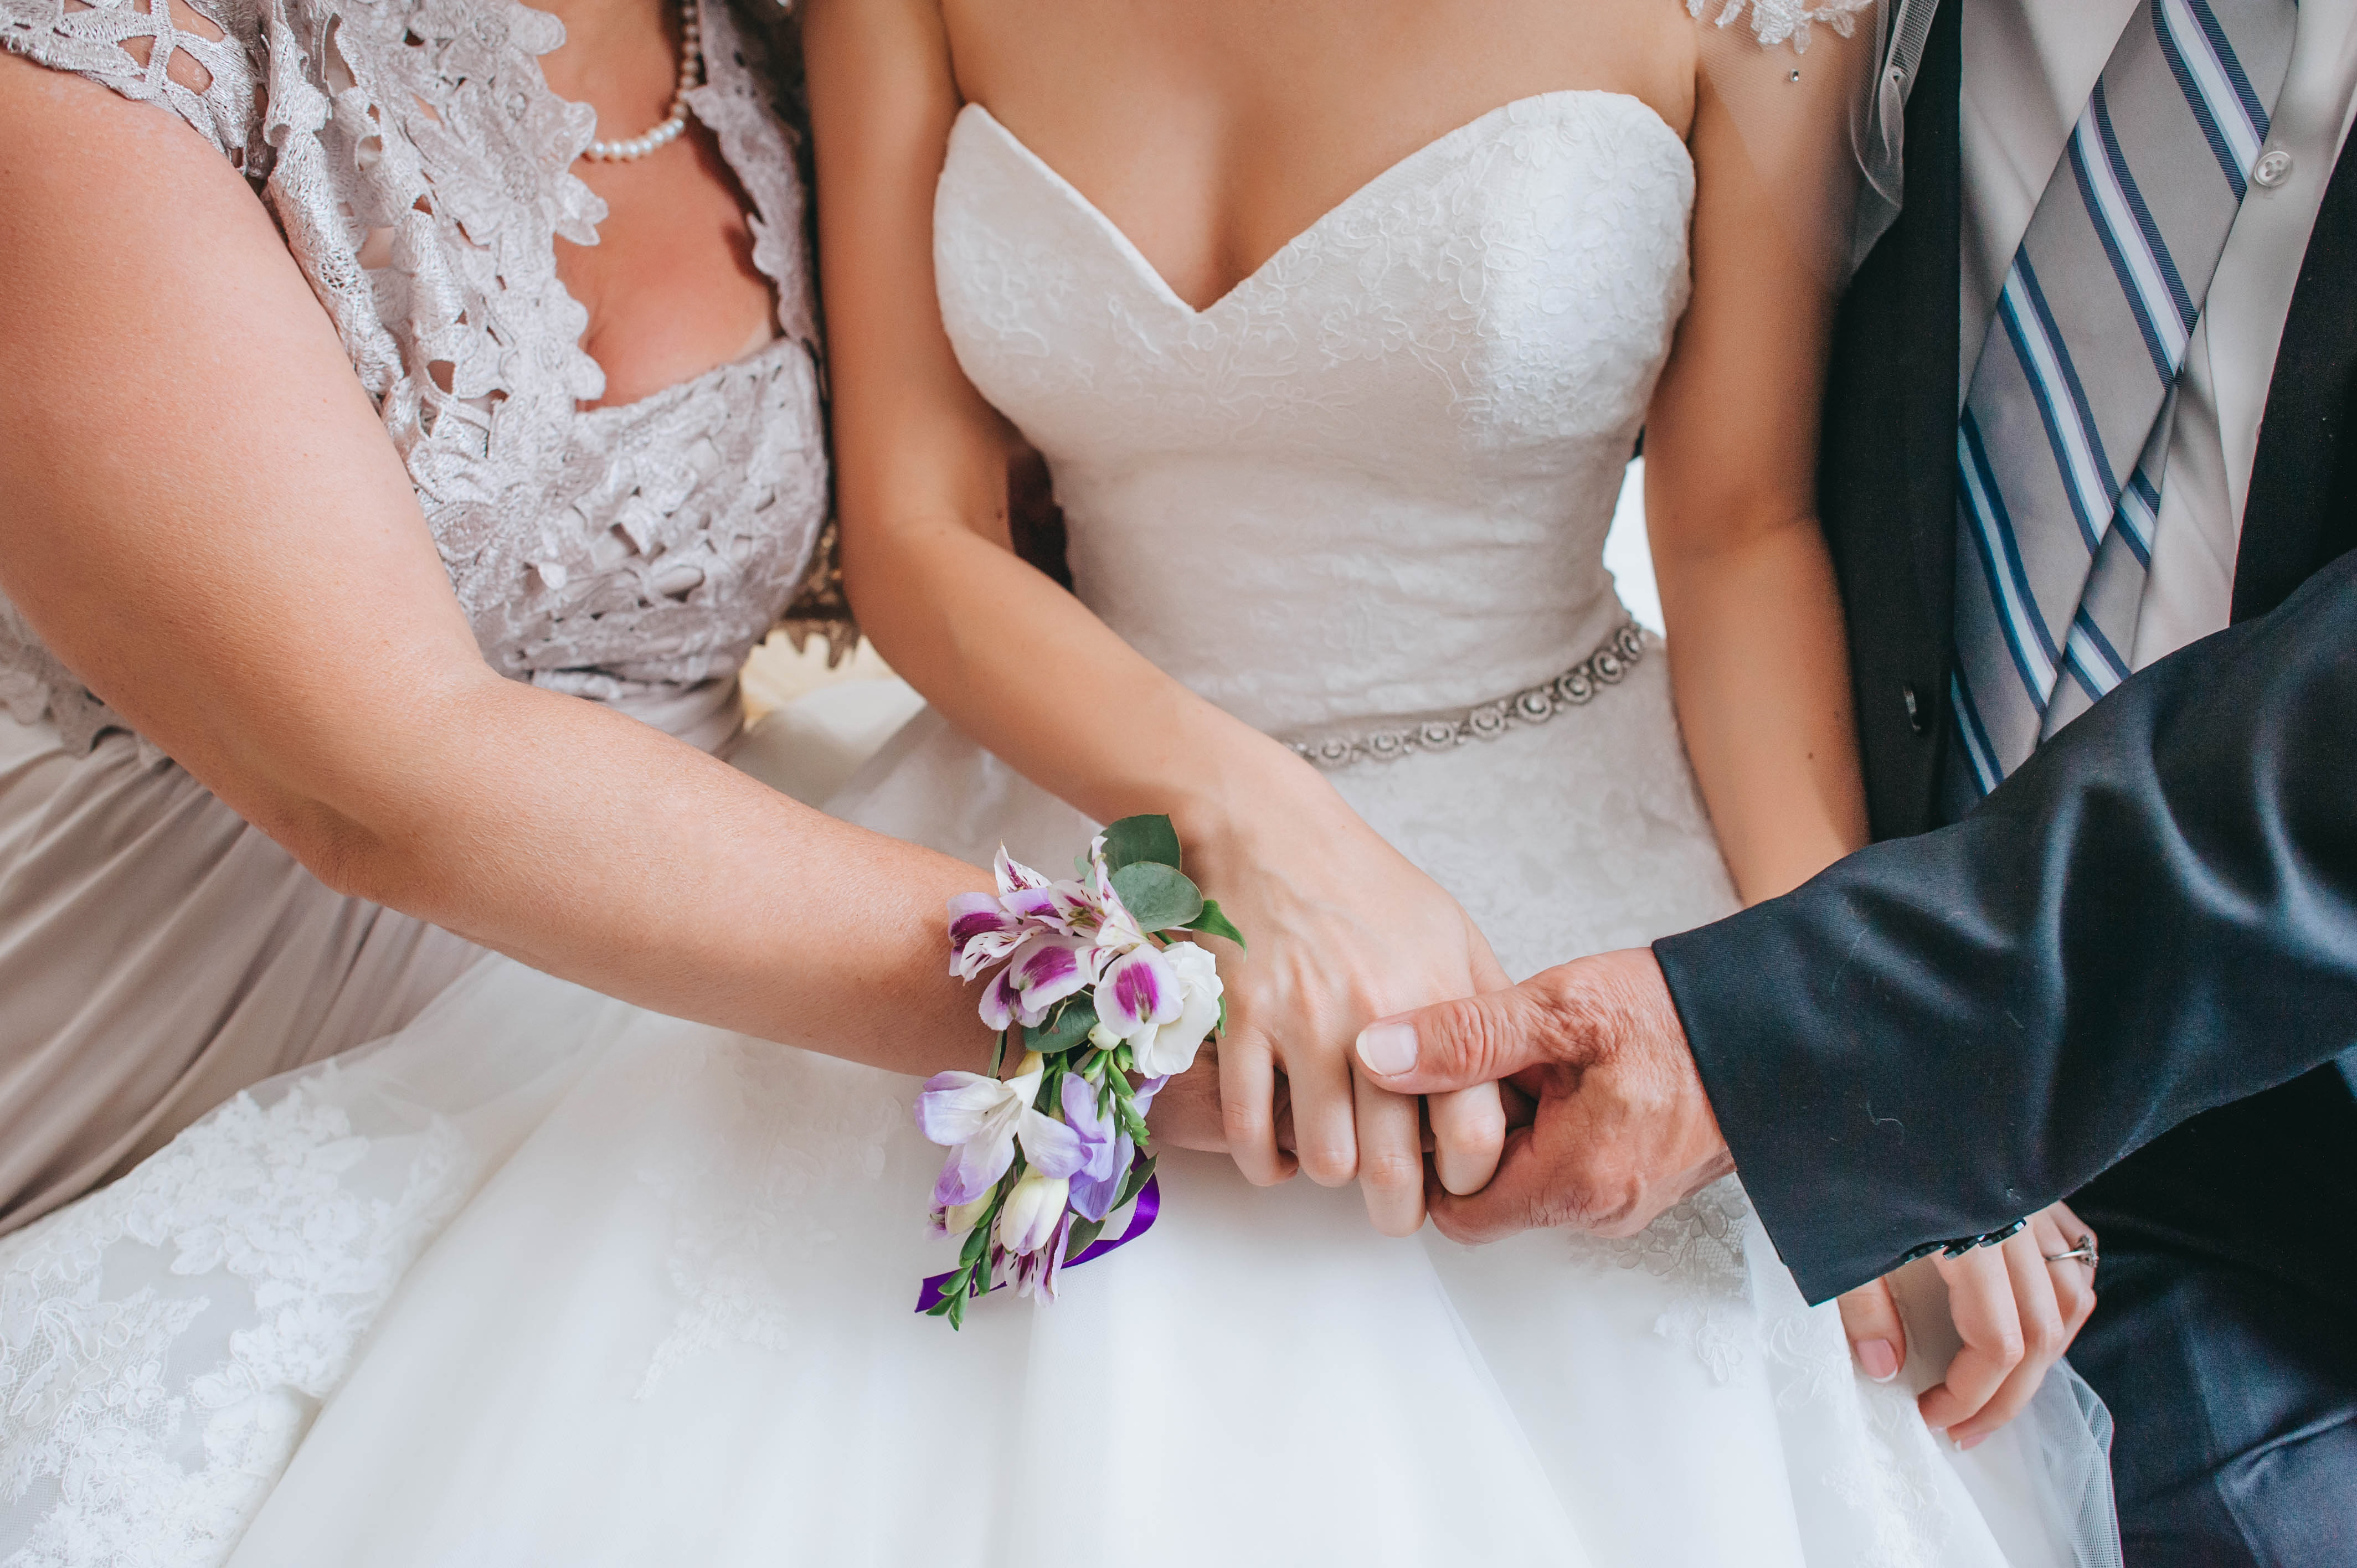 Parents holding their daughter's hand on her wedding day | Source: Shutterstock